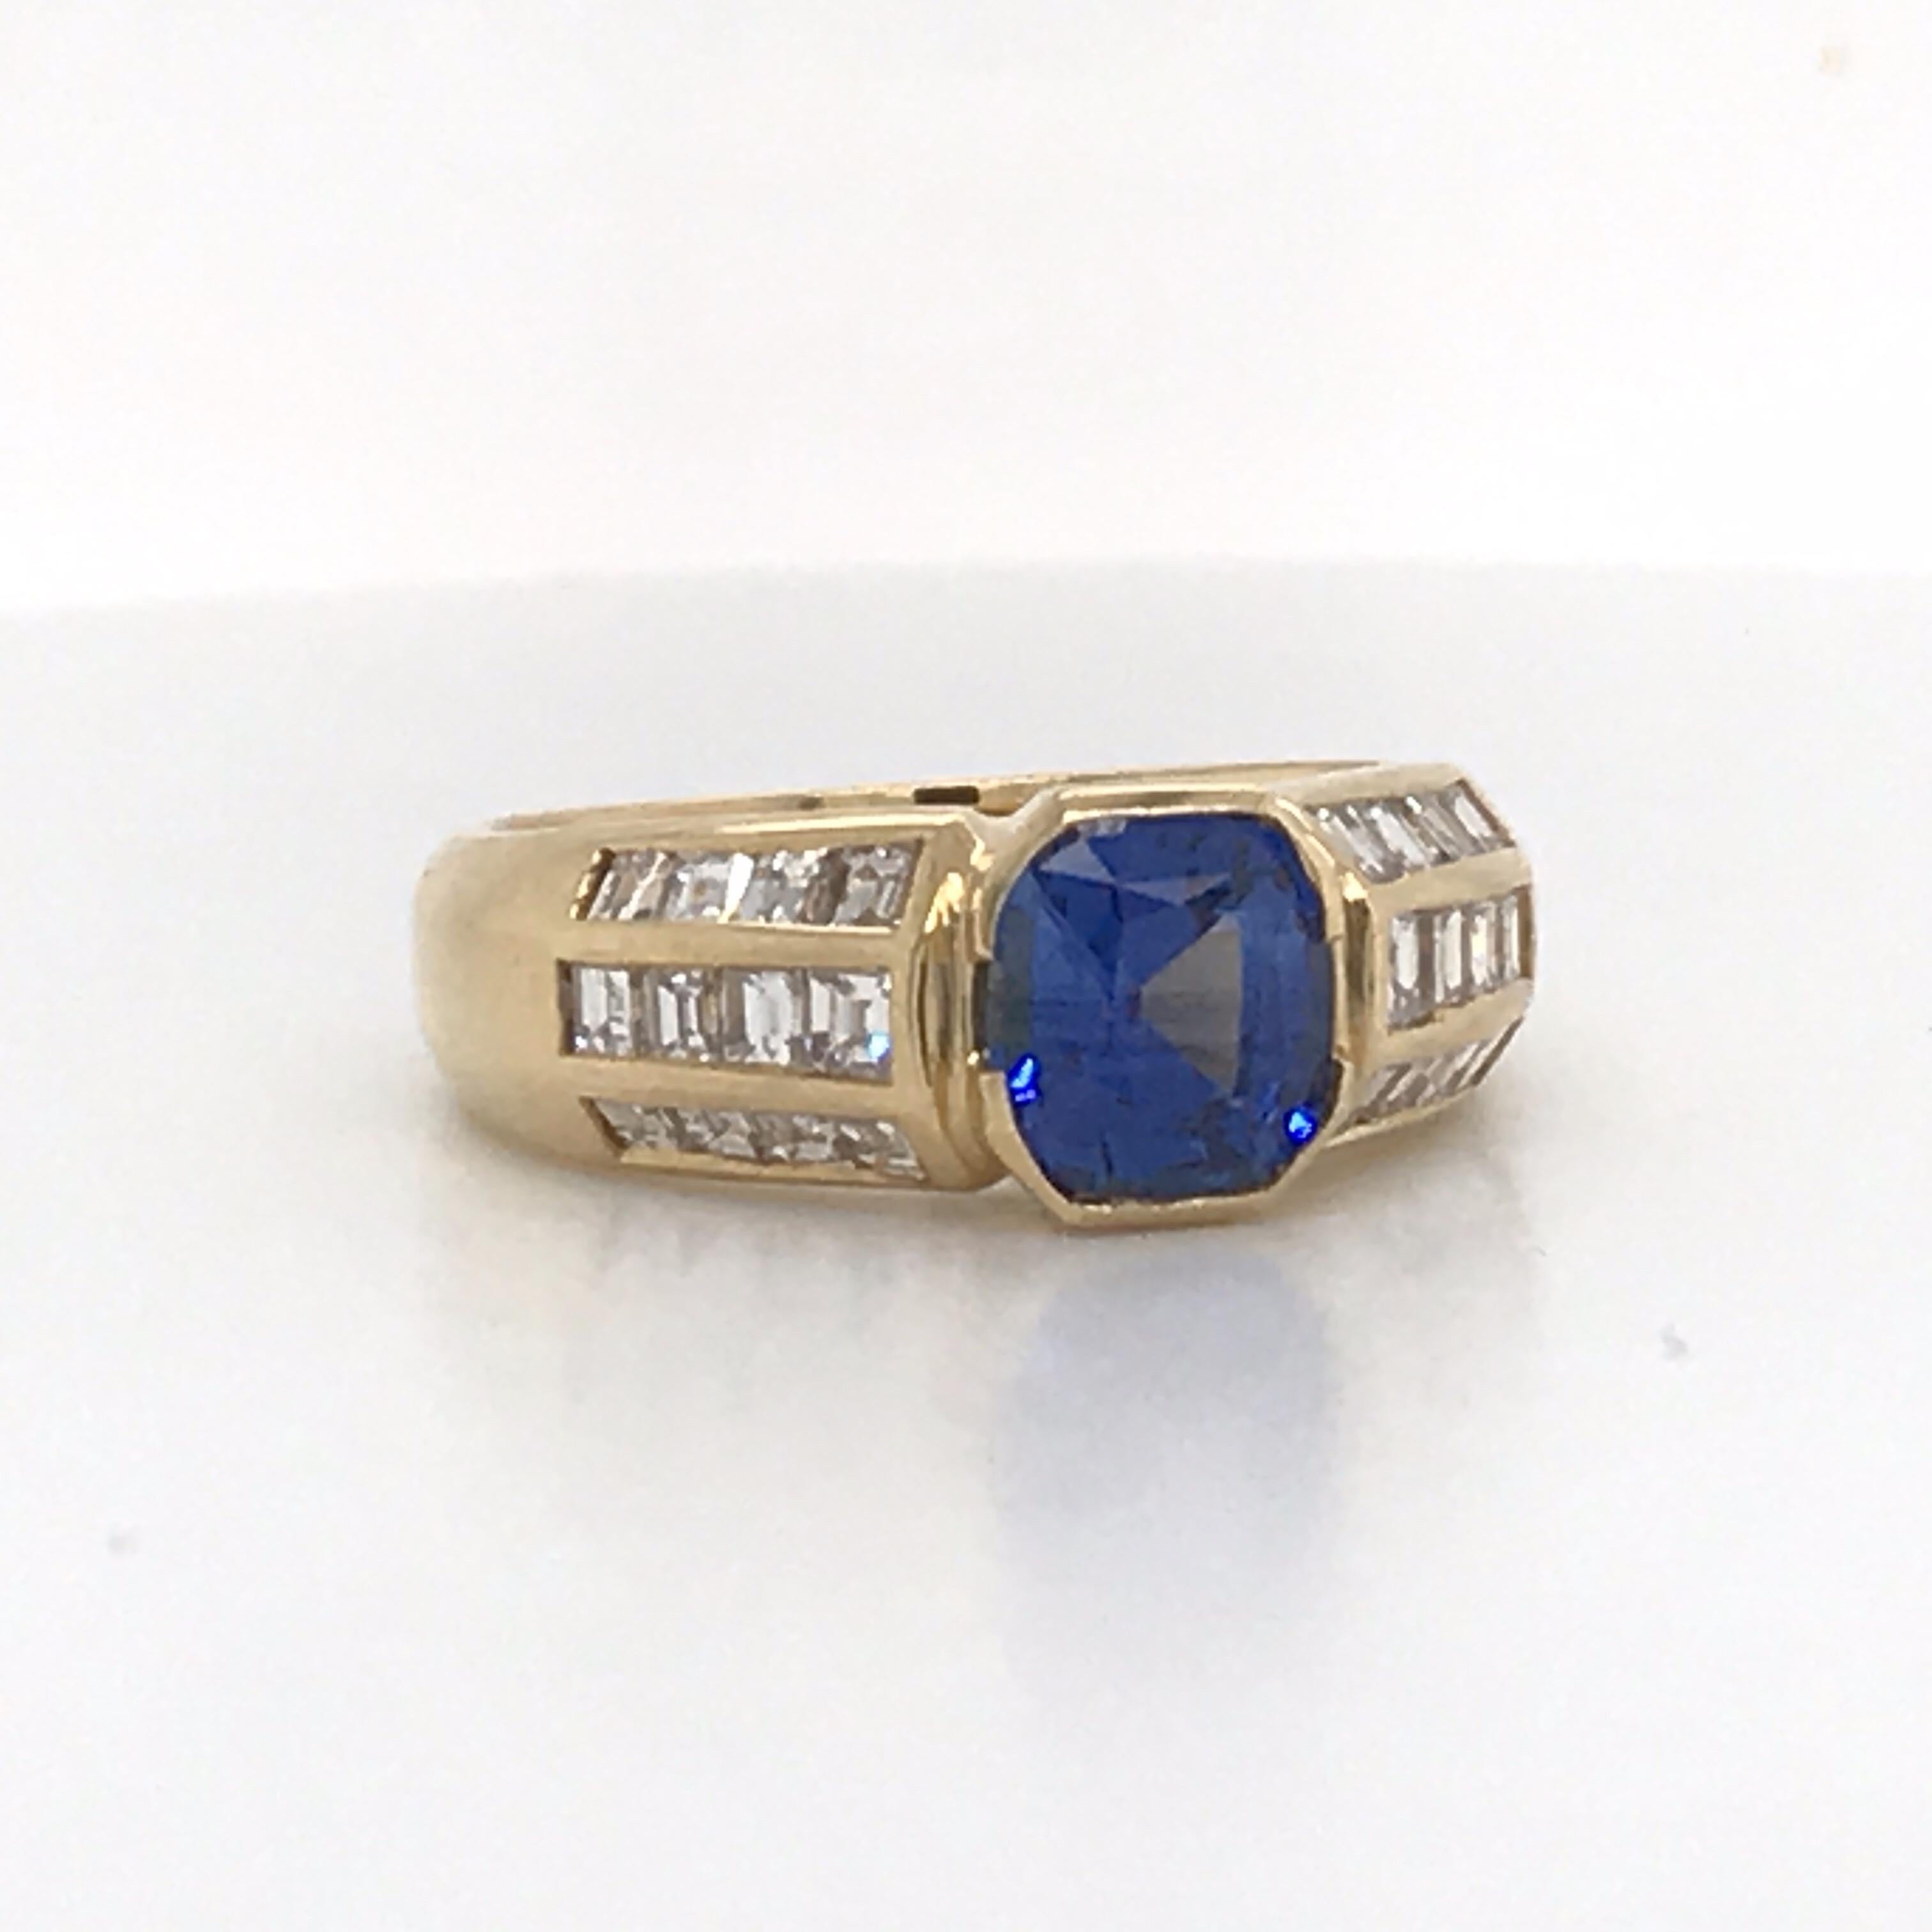 18K Yellow gold ring featuring one cushion cut sapphire weighing 1.62 carats flanked with three rows of diamonds weighing approximately 1 carat.  
Sapphire with heat
Beautiful color!

Size 7.25, sizeable 